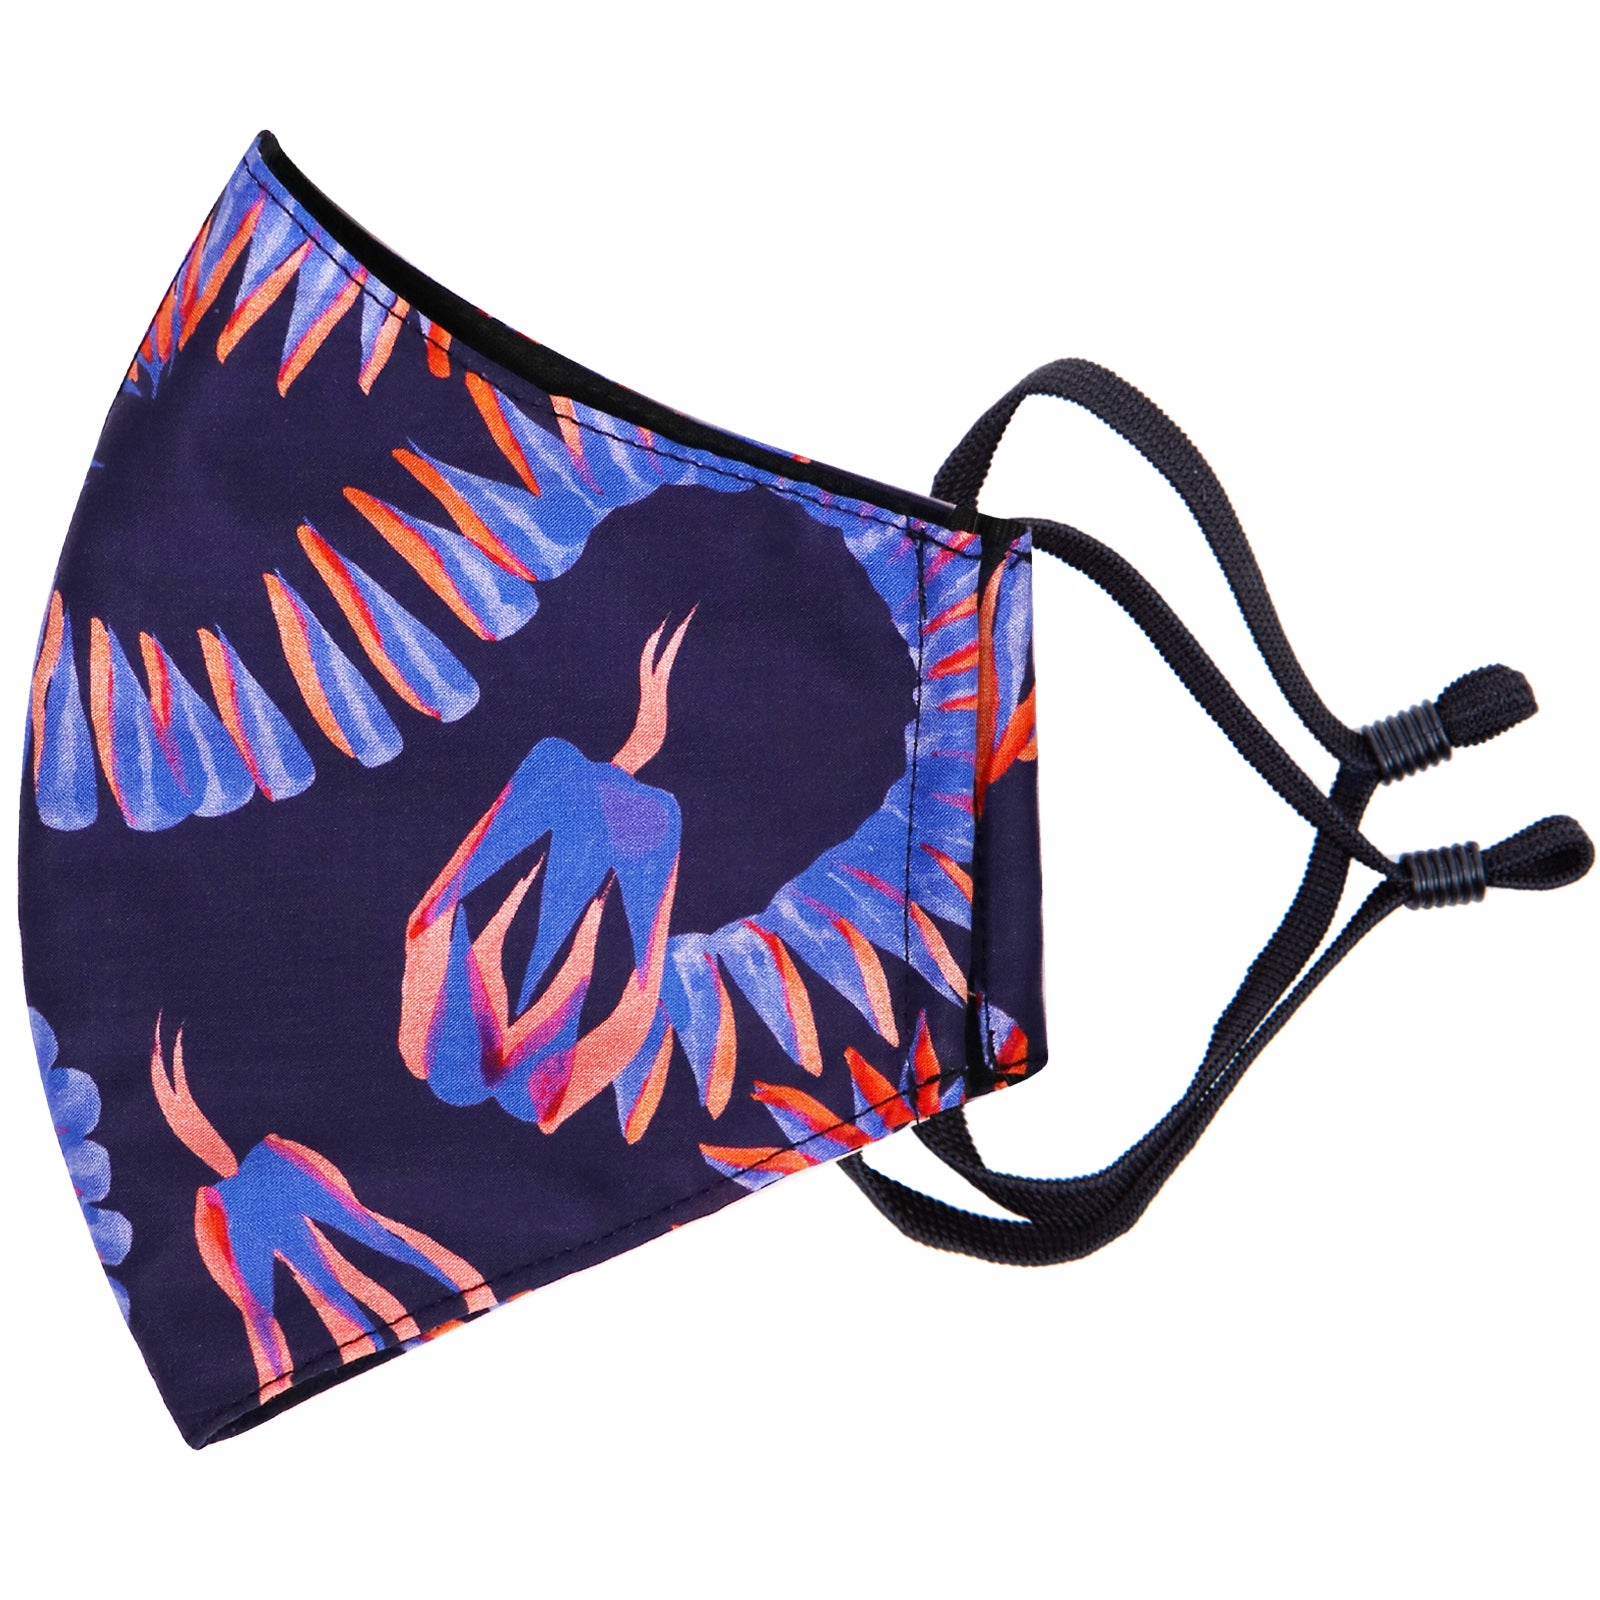 snake your way through the crowd with this fashion liberty cotton face mask made in NZ by Parisian with fine merino lining and adjustable toggles for extra comfort.